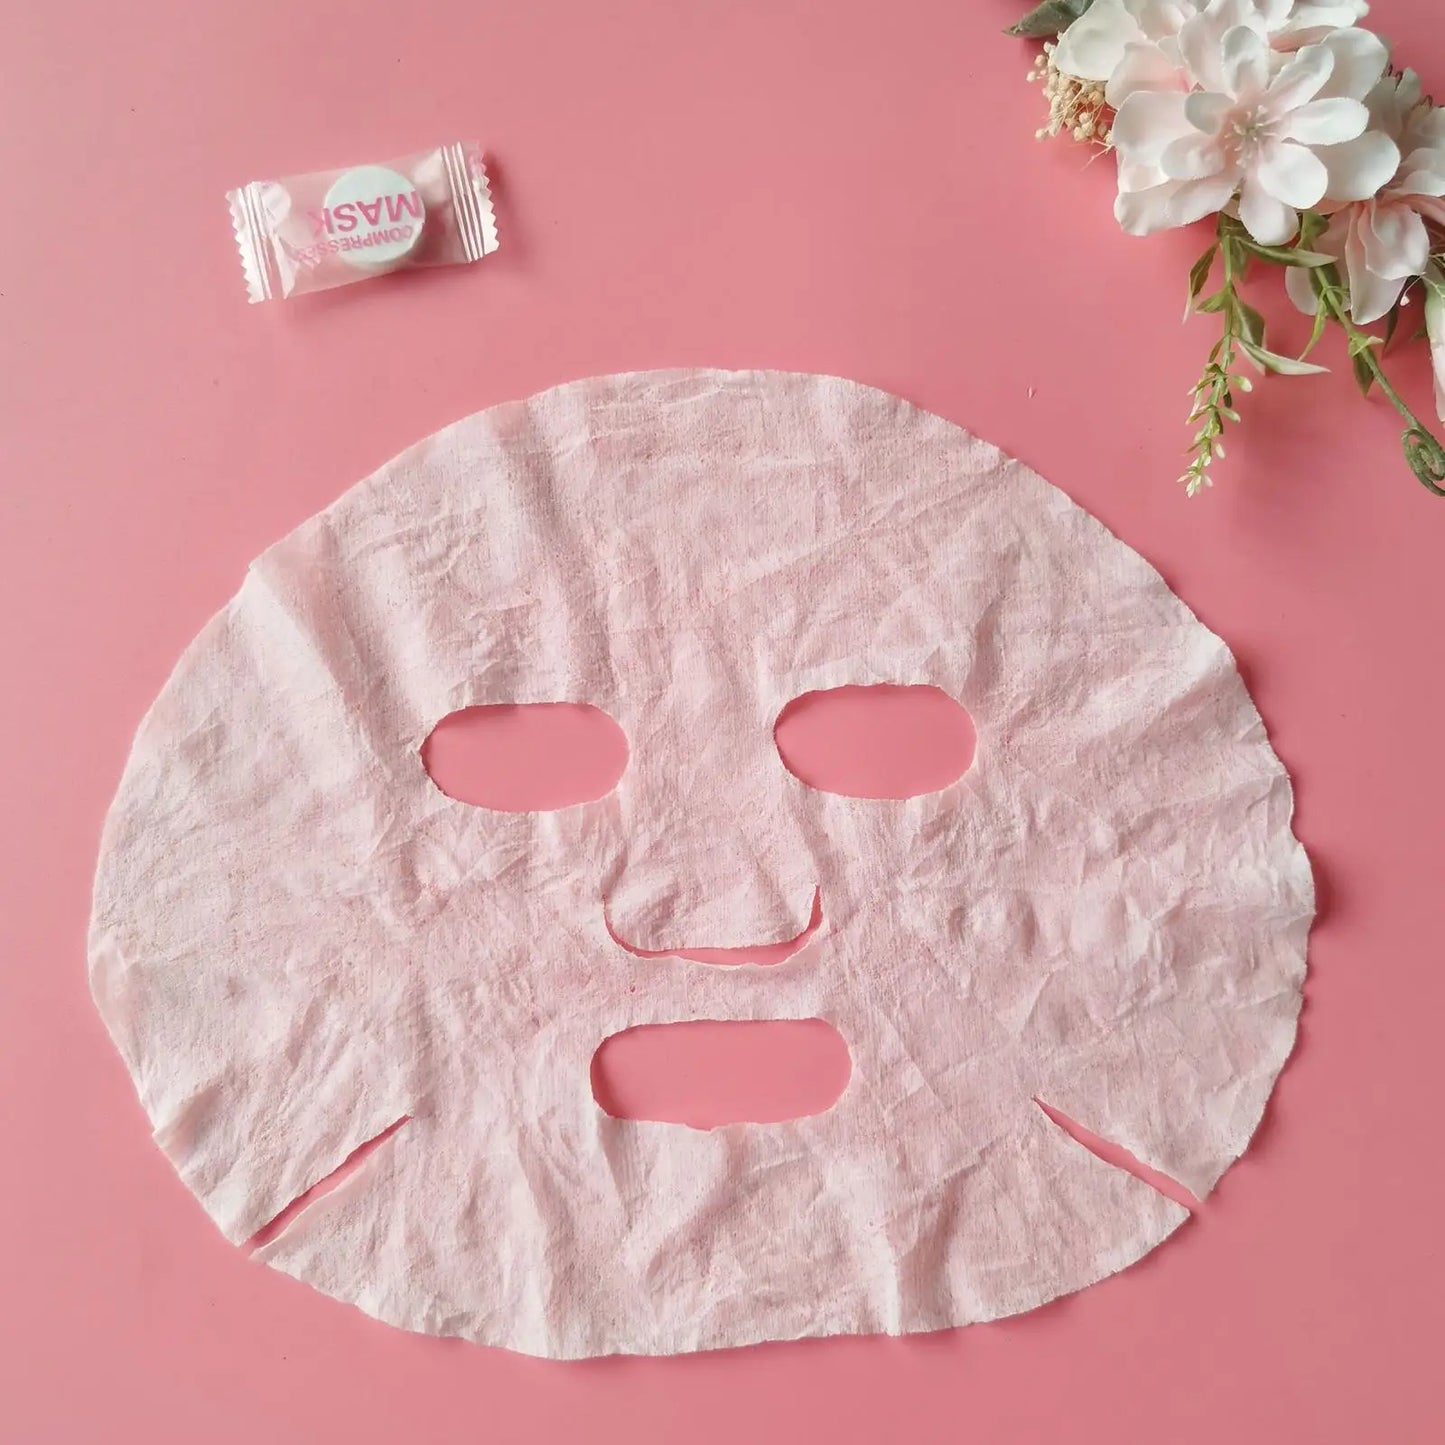 50pcs/Bag Travel Outdoor Pure Cotton Non Woven Compressed Disposable Facial Towel Sheet Cloth Wet Wipes Tissue Mask Makeup Clean